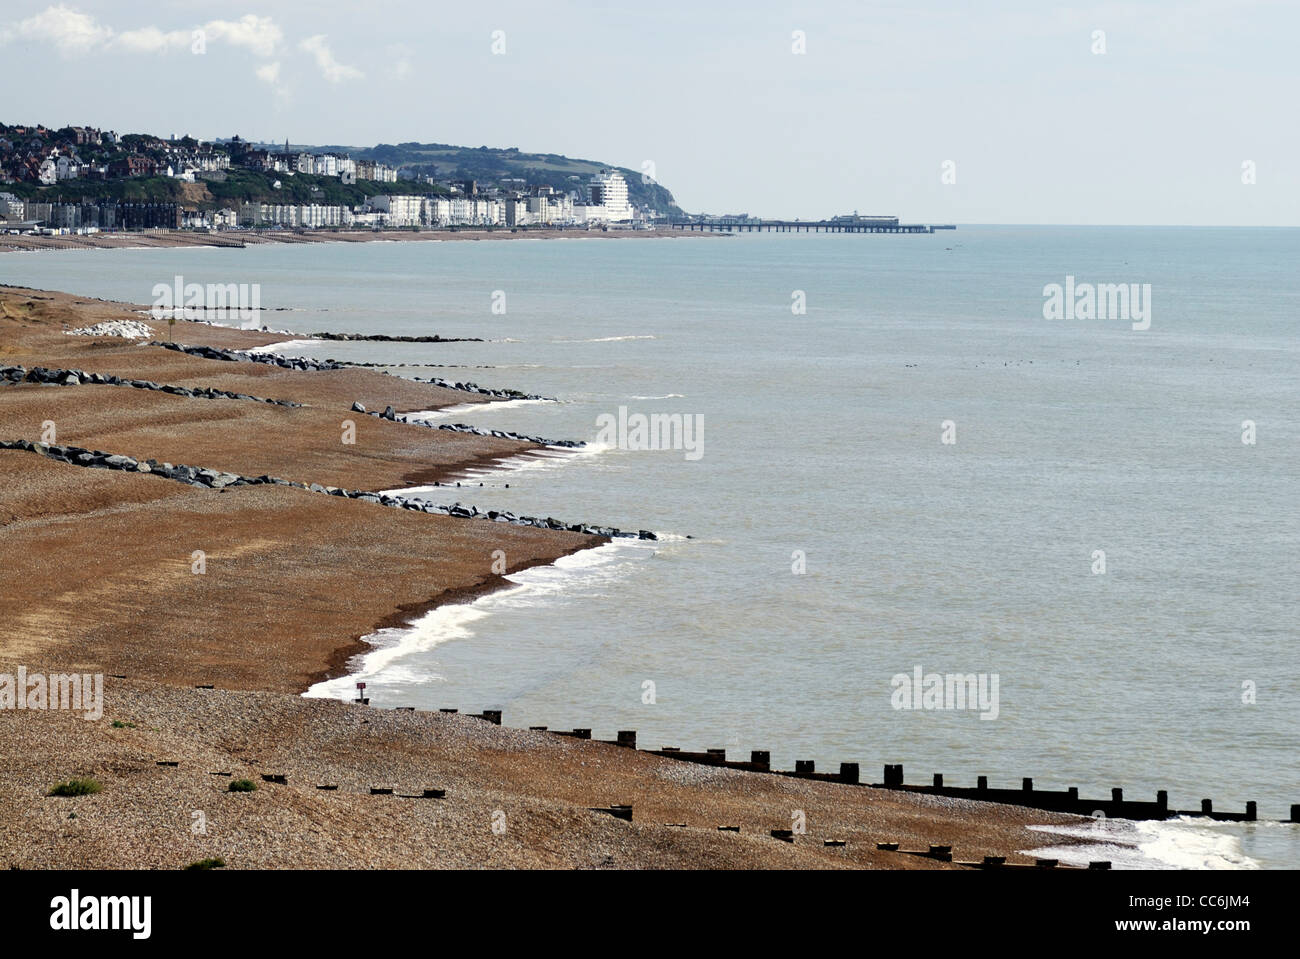 Groynes(sea defense system), along the beach at Hastings, east sussex, england,UK Stock Photo